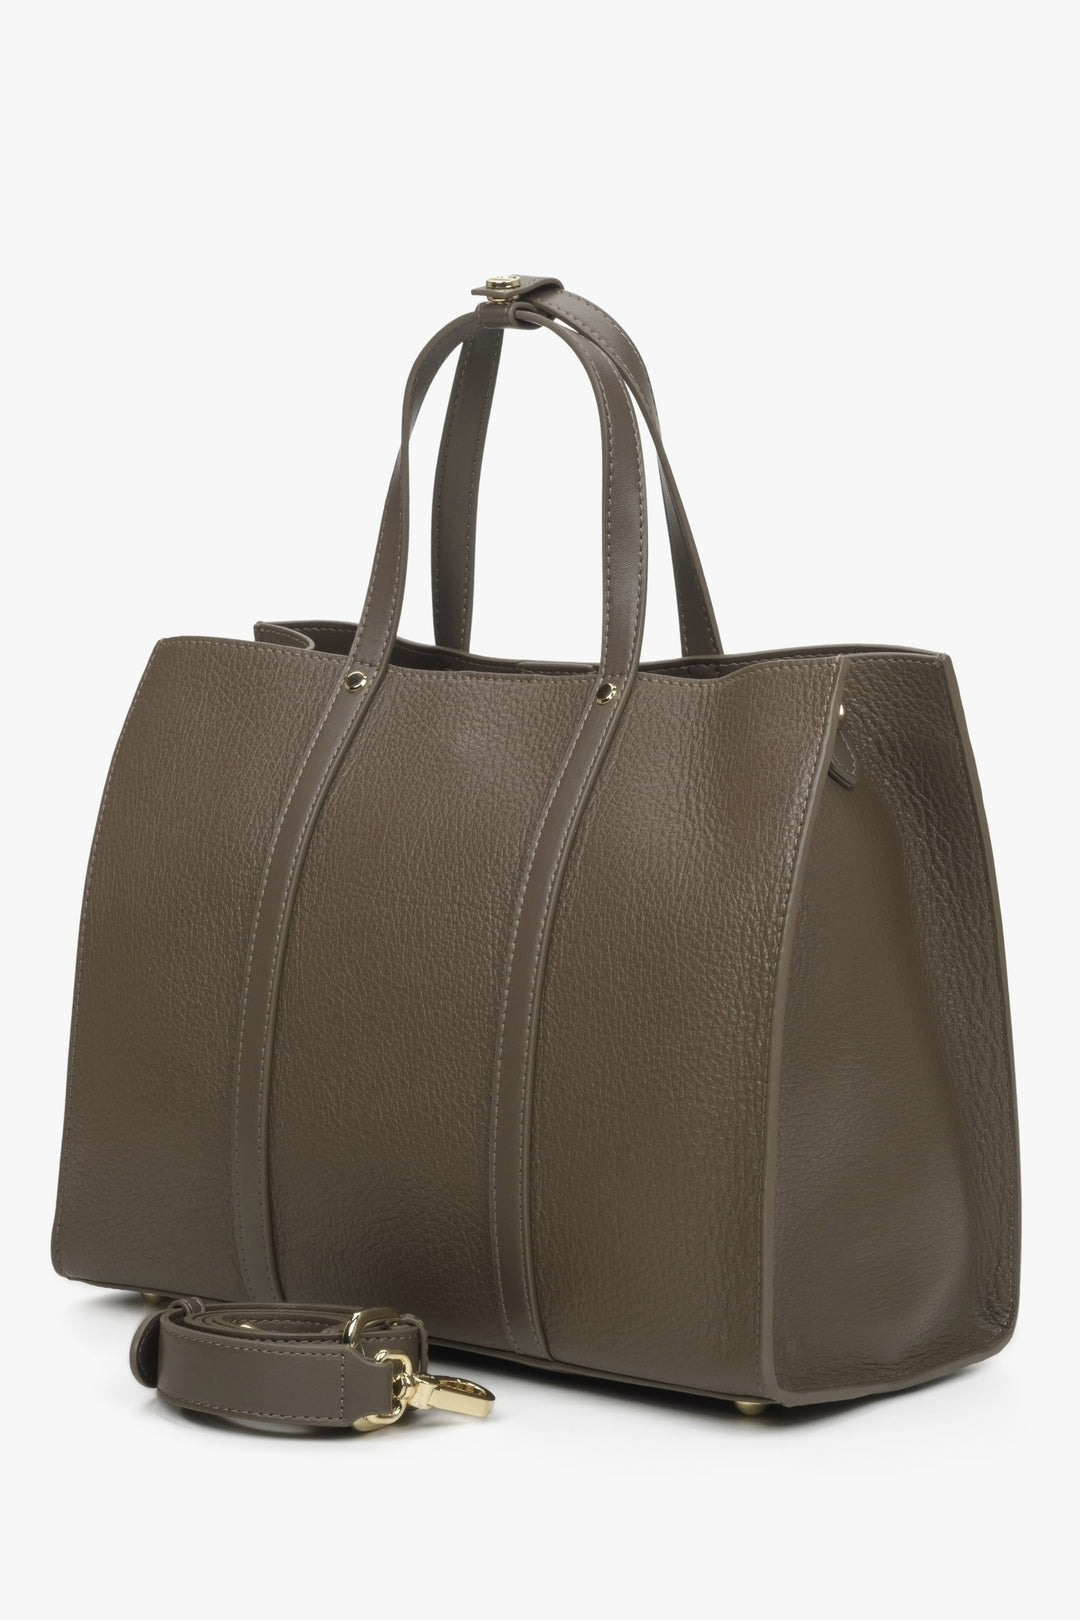 Spacious brown leather shopper bag for women with additional adjustable strap.